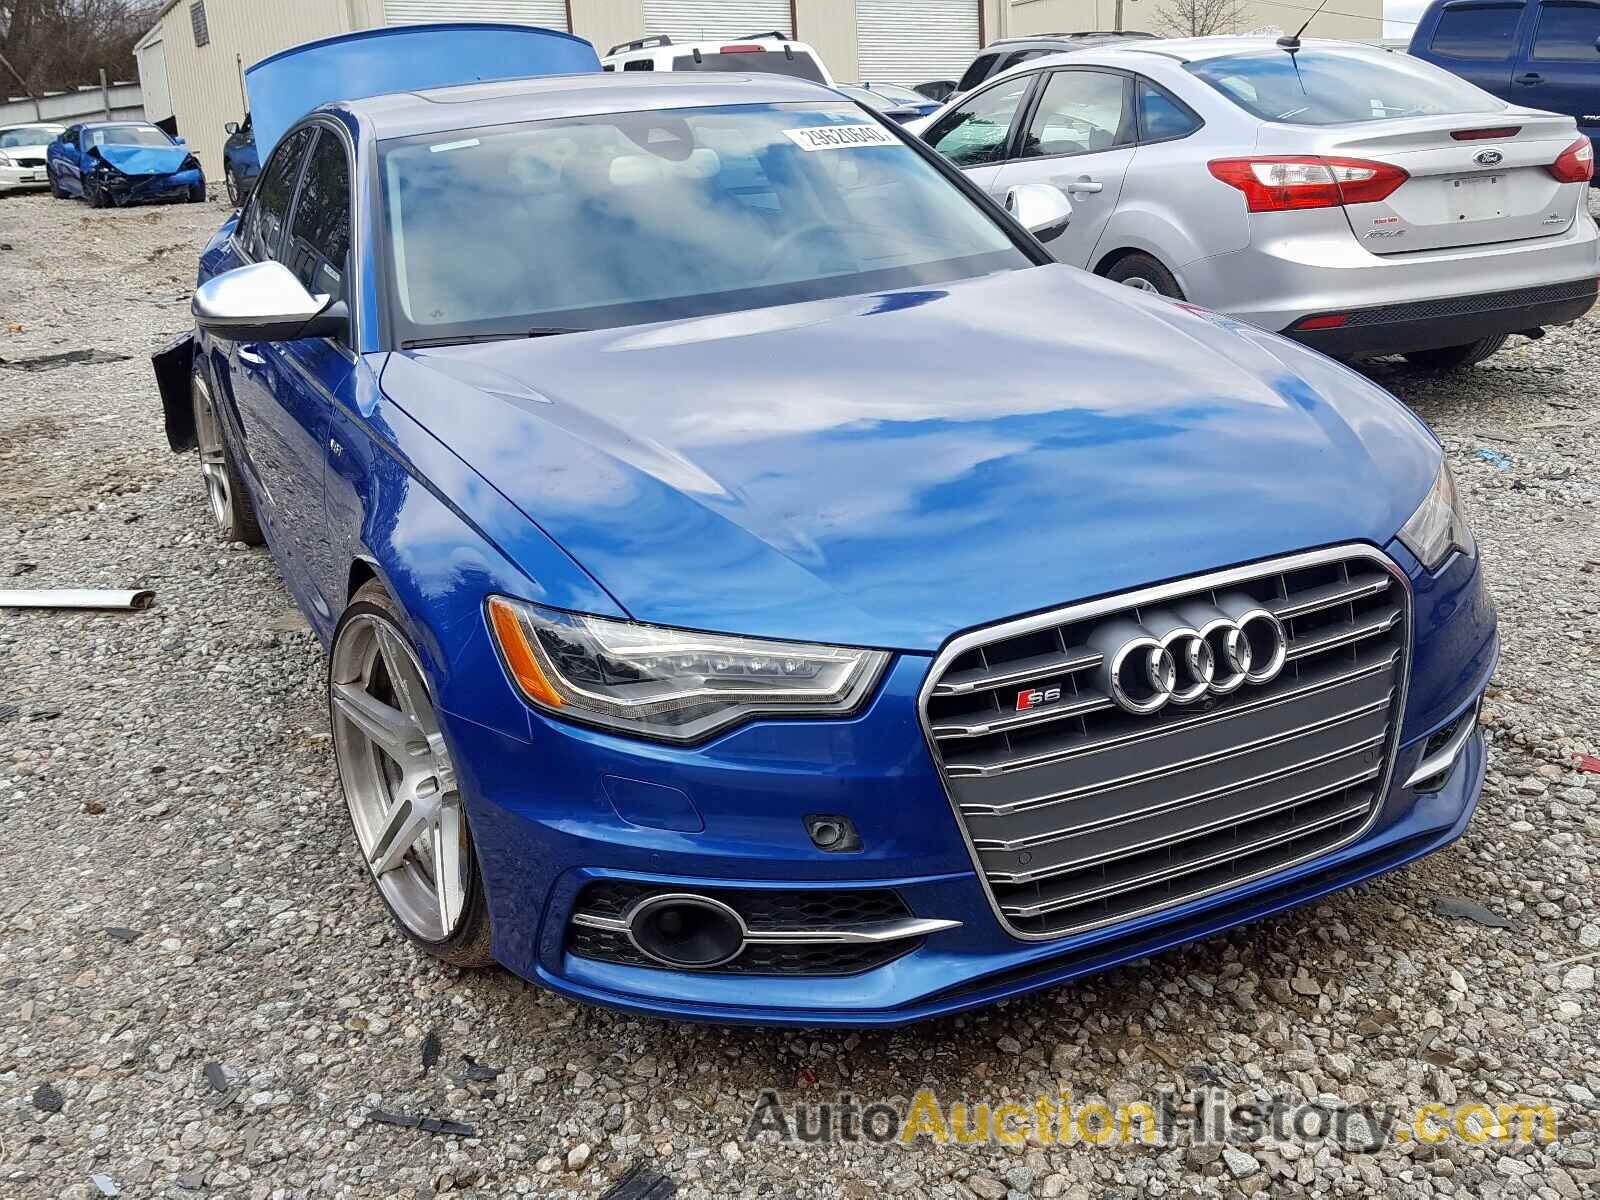 2015 AUDI S6/RS6, WAUF2AFC8FN013843